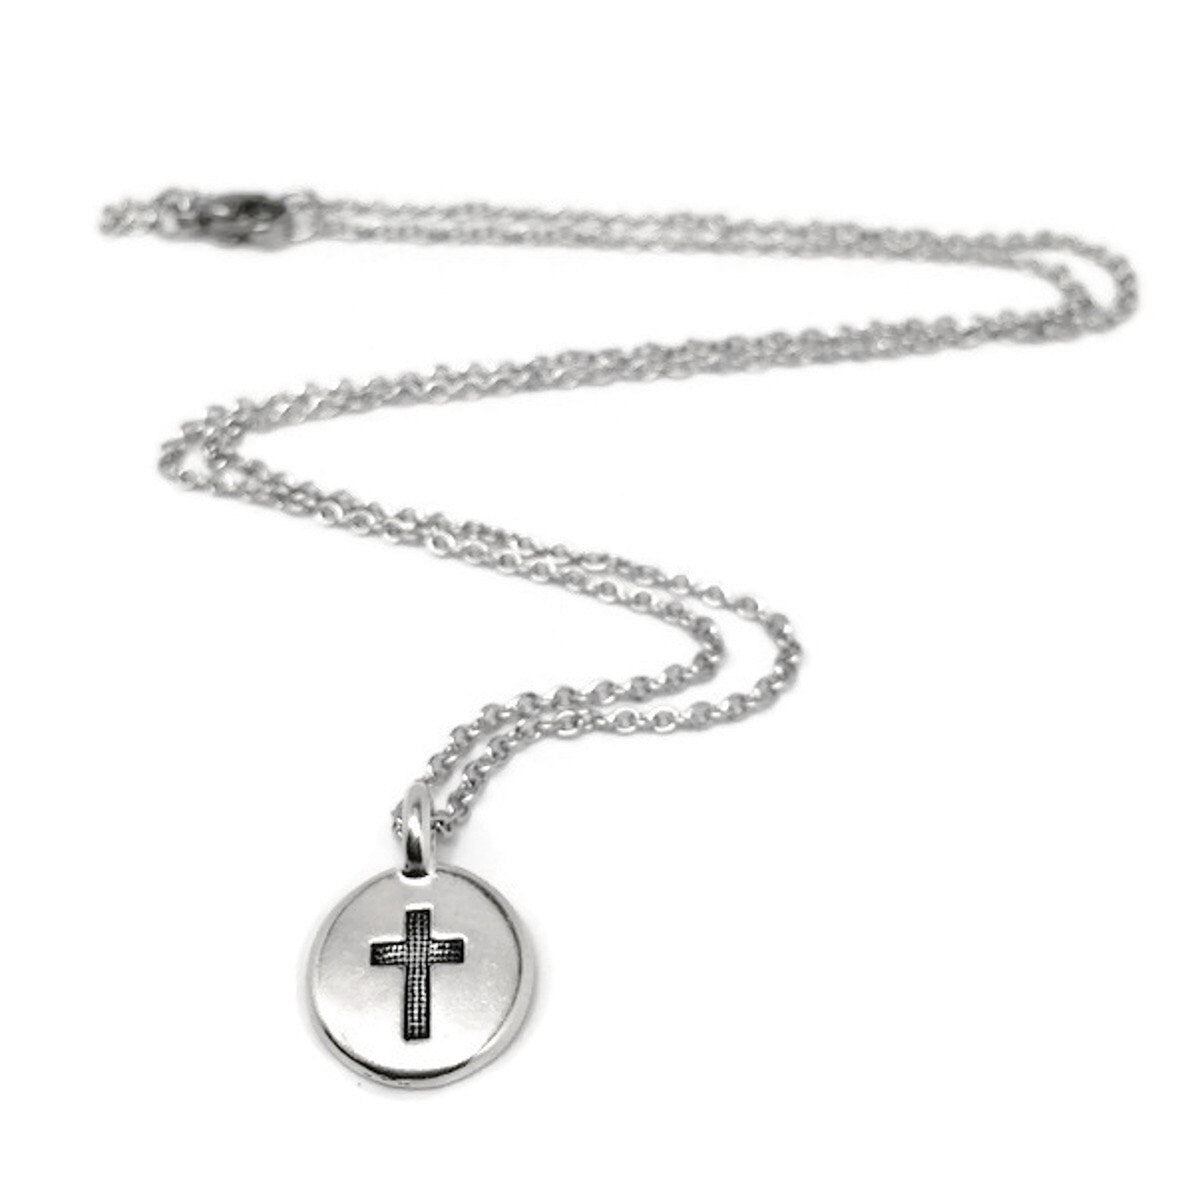 Small Silver Cross Pendant, Christian Jewelry, Silver Charm Necklace, Confirmation Gift, Religious Gift for Women